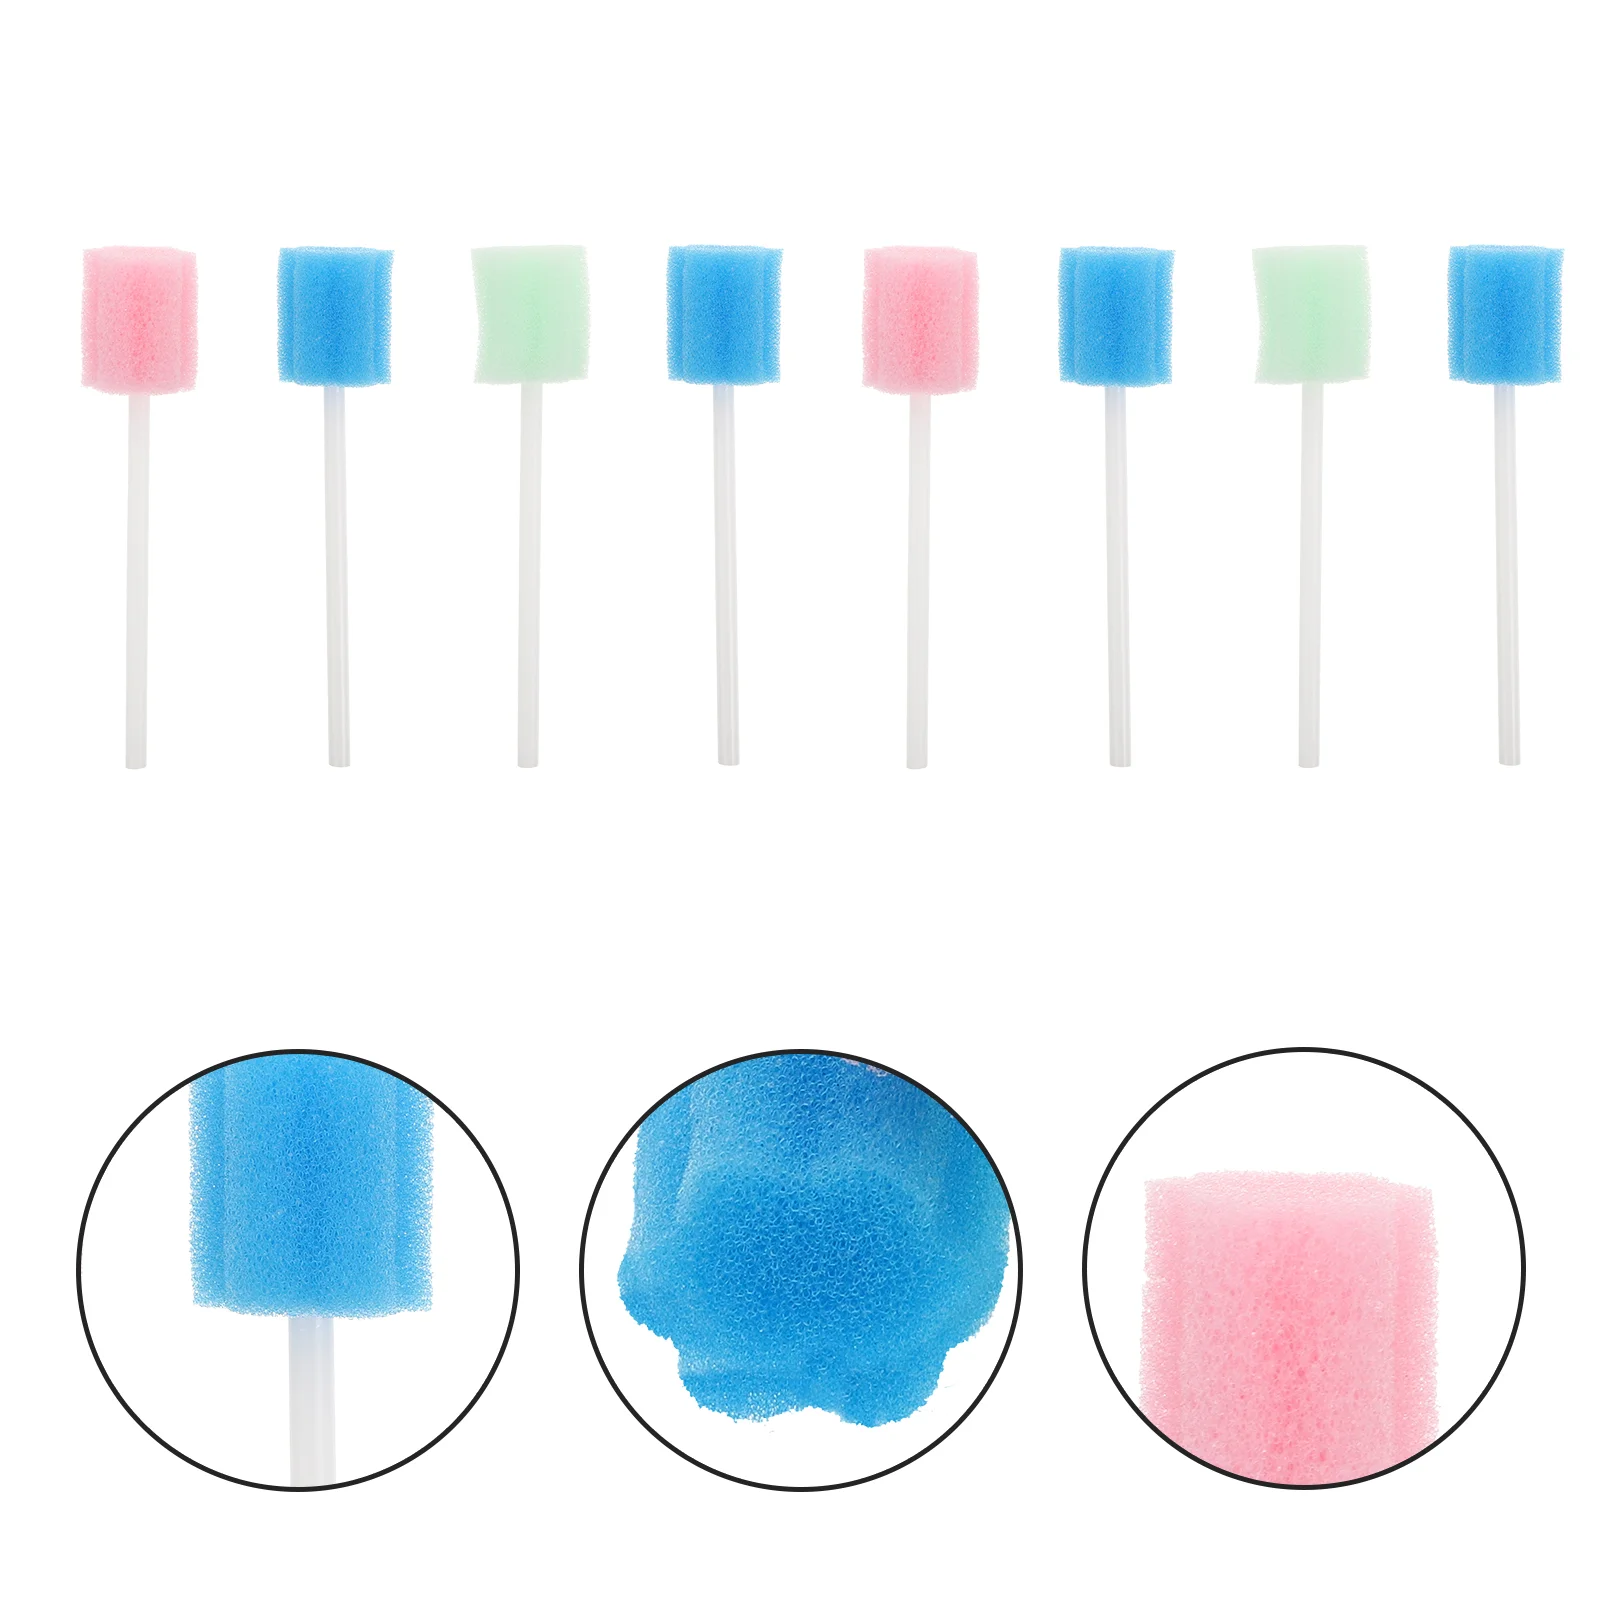 

300 Pcs Sponge Stick Sterile Cotton Swabs Mouth Dental Cleaning Sticks Teeth Brushing Care Oral Using Tools